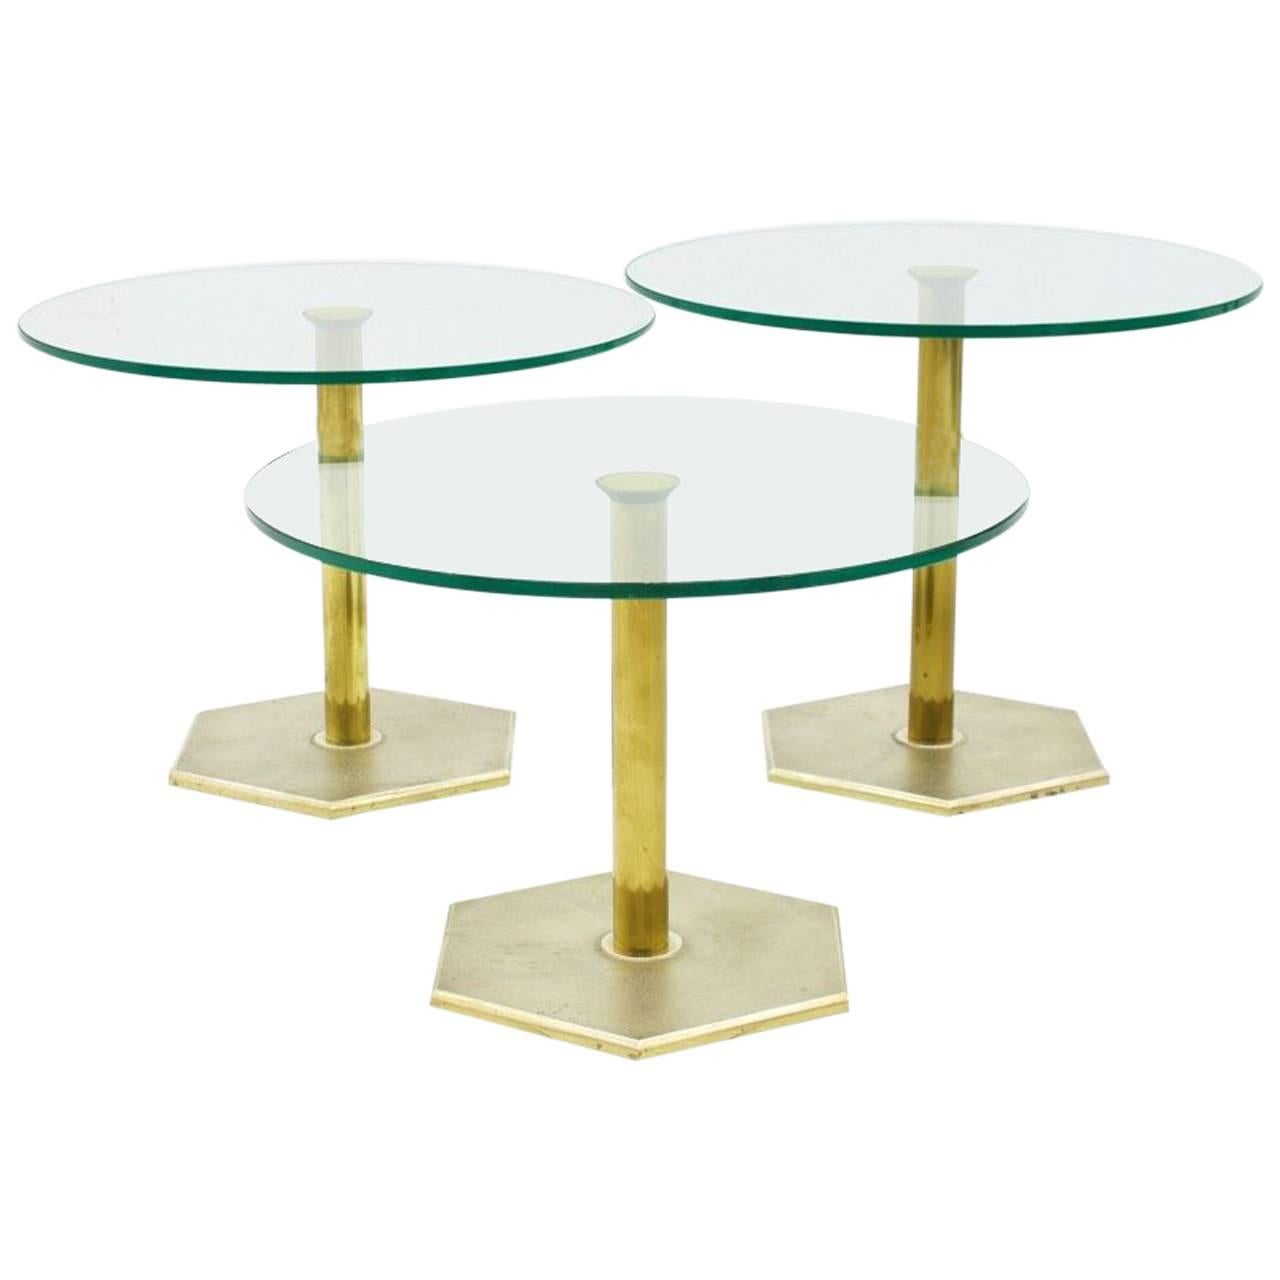 Set of Three Brass and Glass Side Tables, Nesting Tables